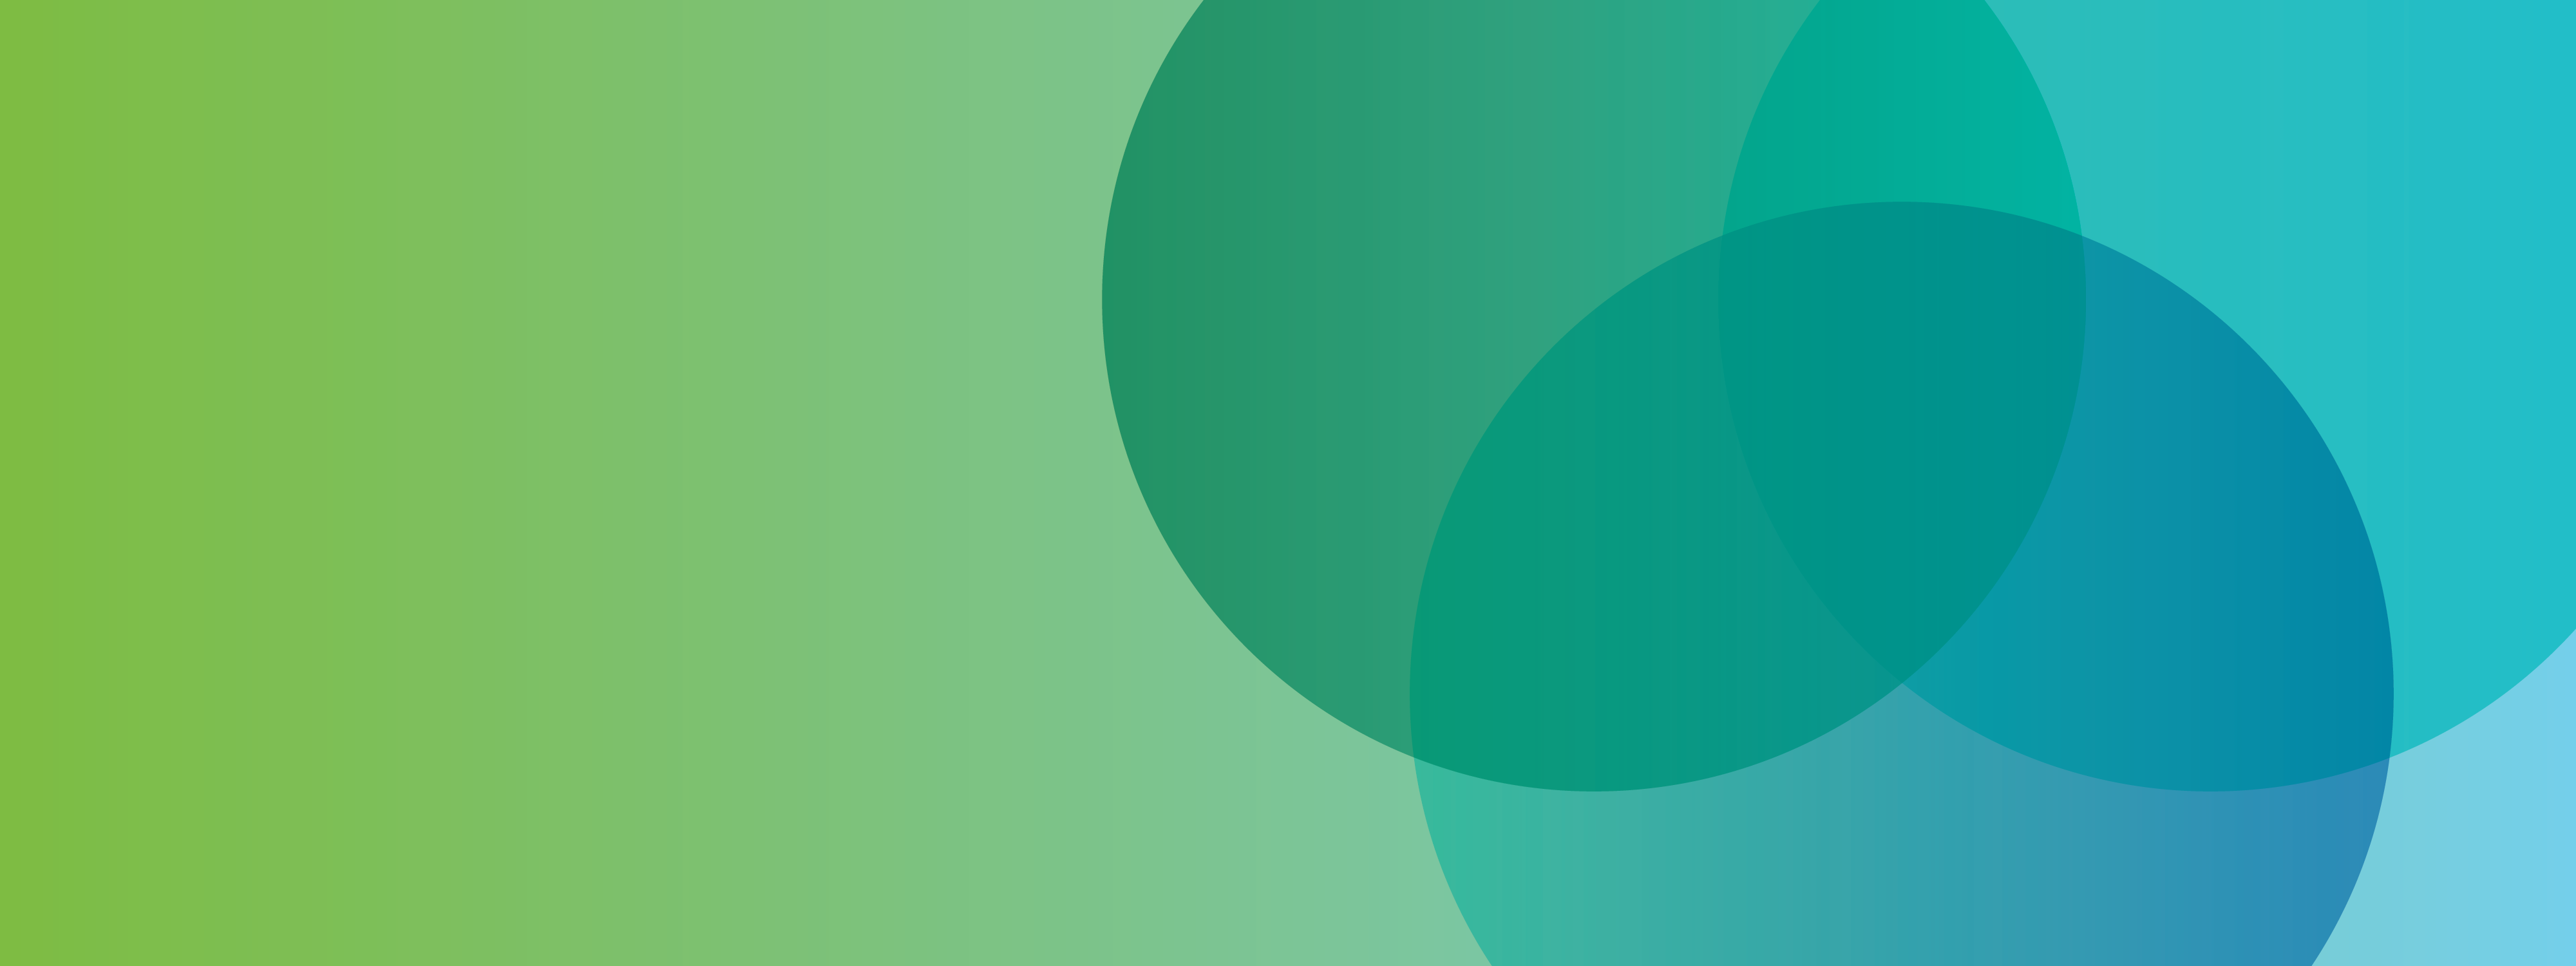 green and blue gradients with overlapping circles